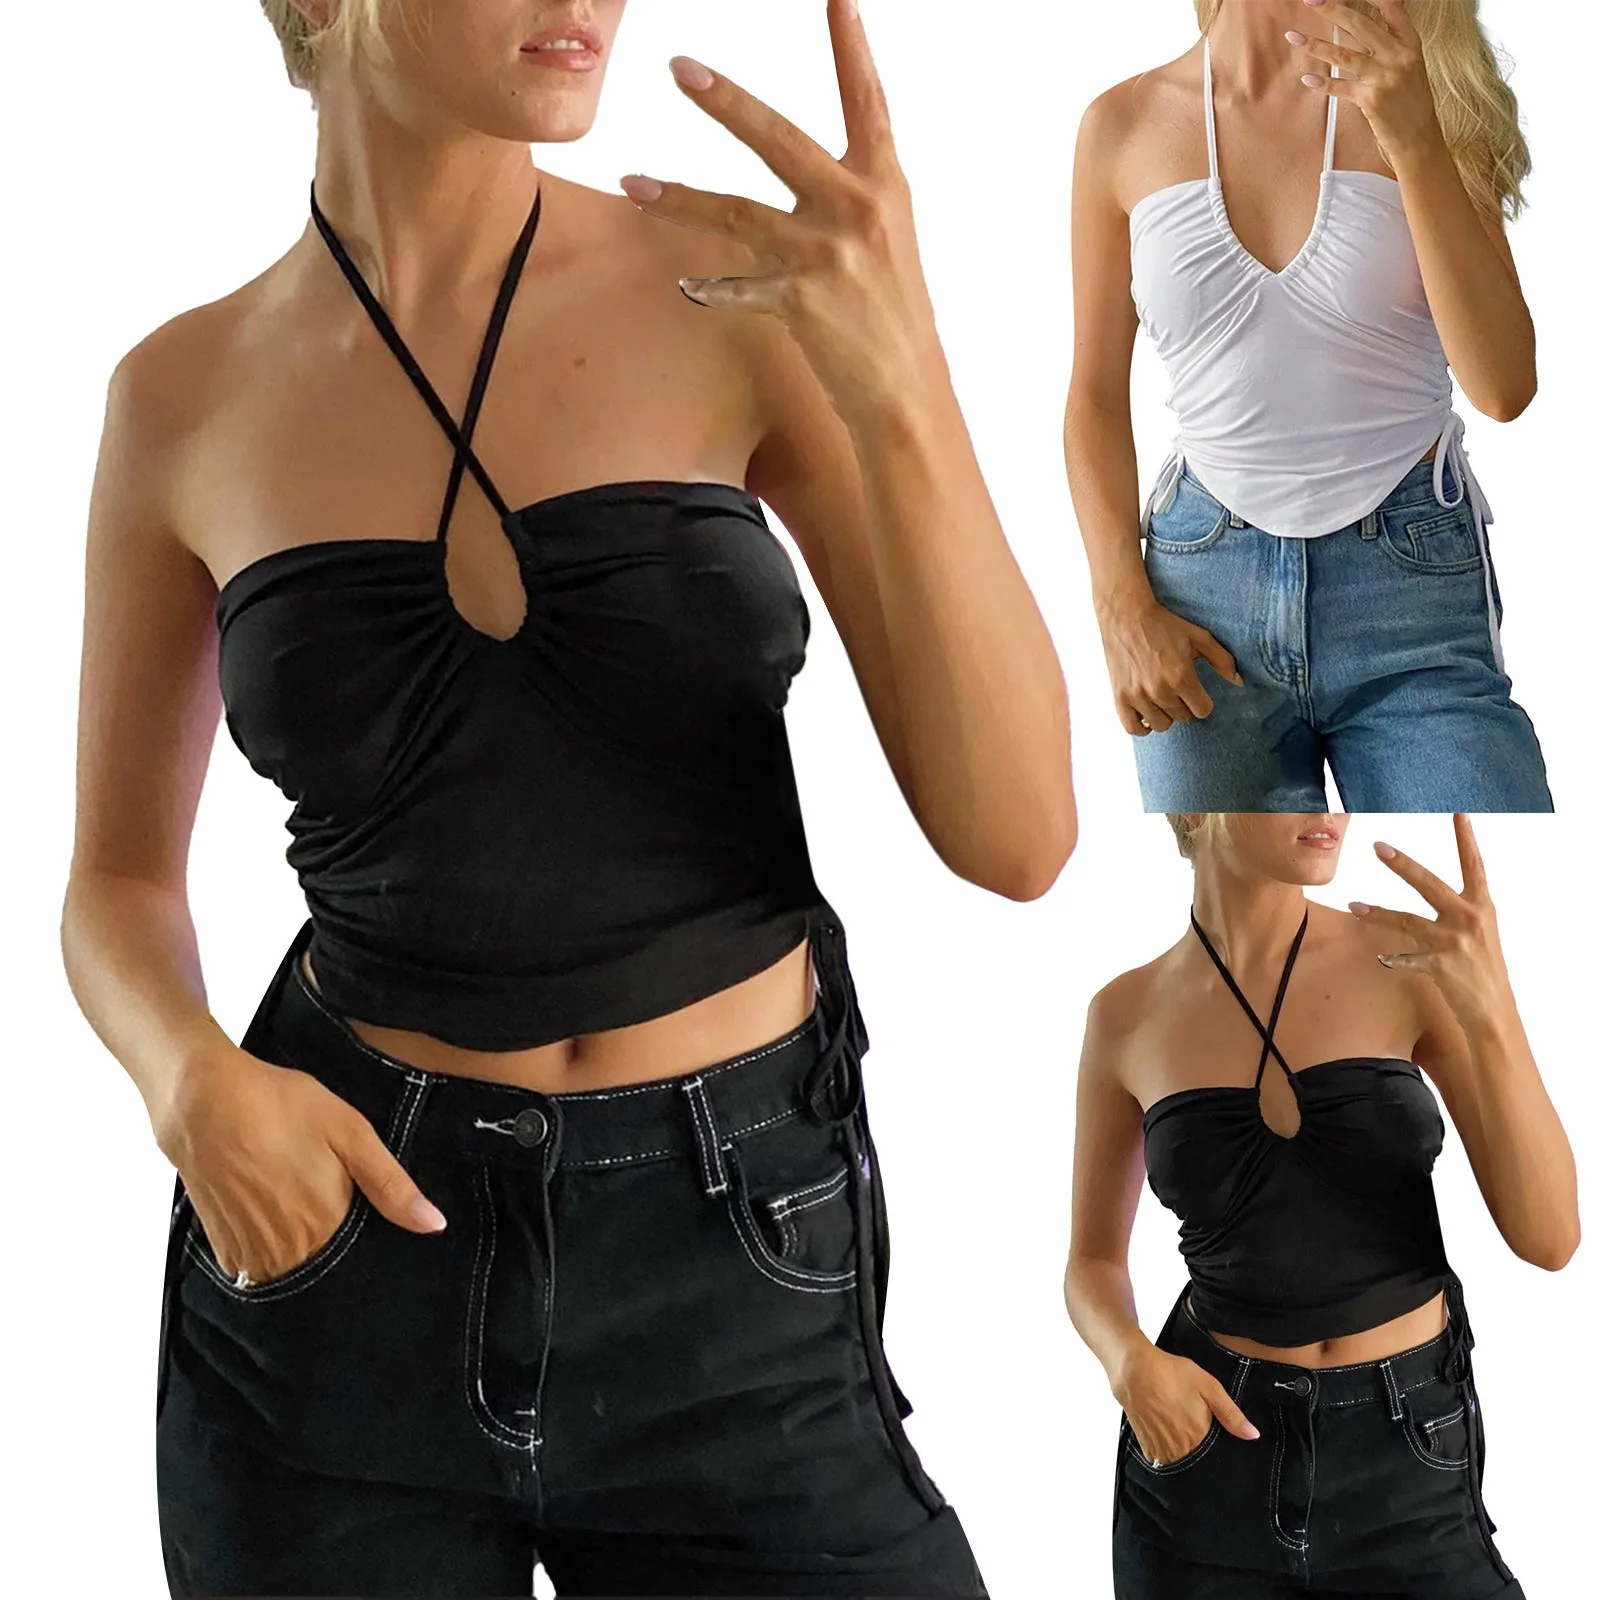 

Basics Ladies Crop Tops Women's Halter Sleeveless Sexy Unique Slim Fit Tank Top Athletic Women Camis Blouse Strapless Sports Tee